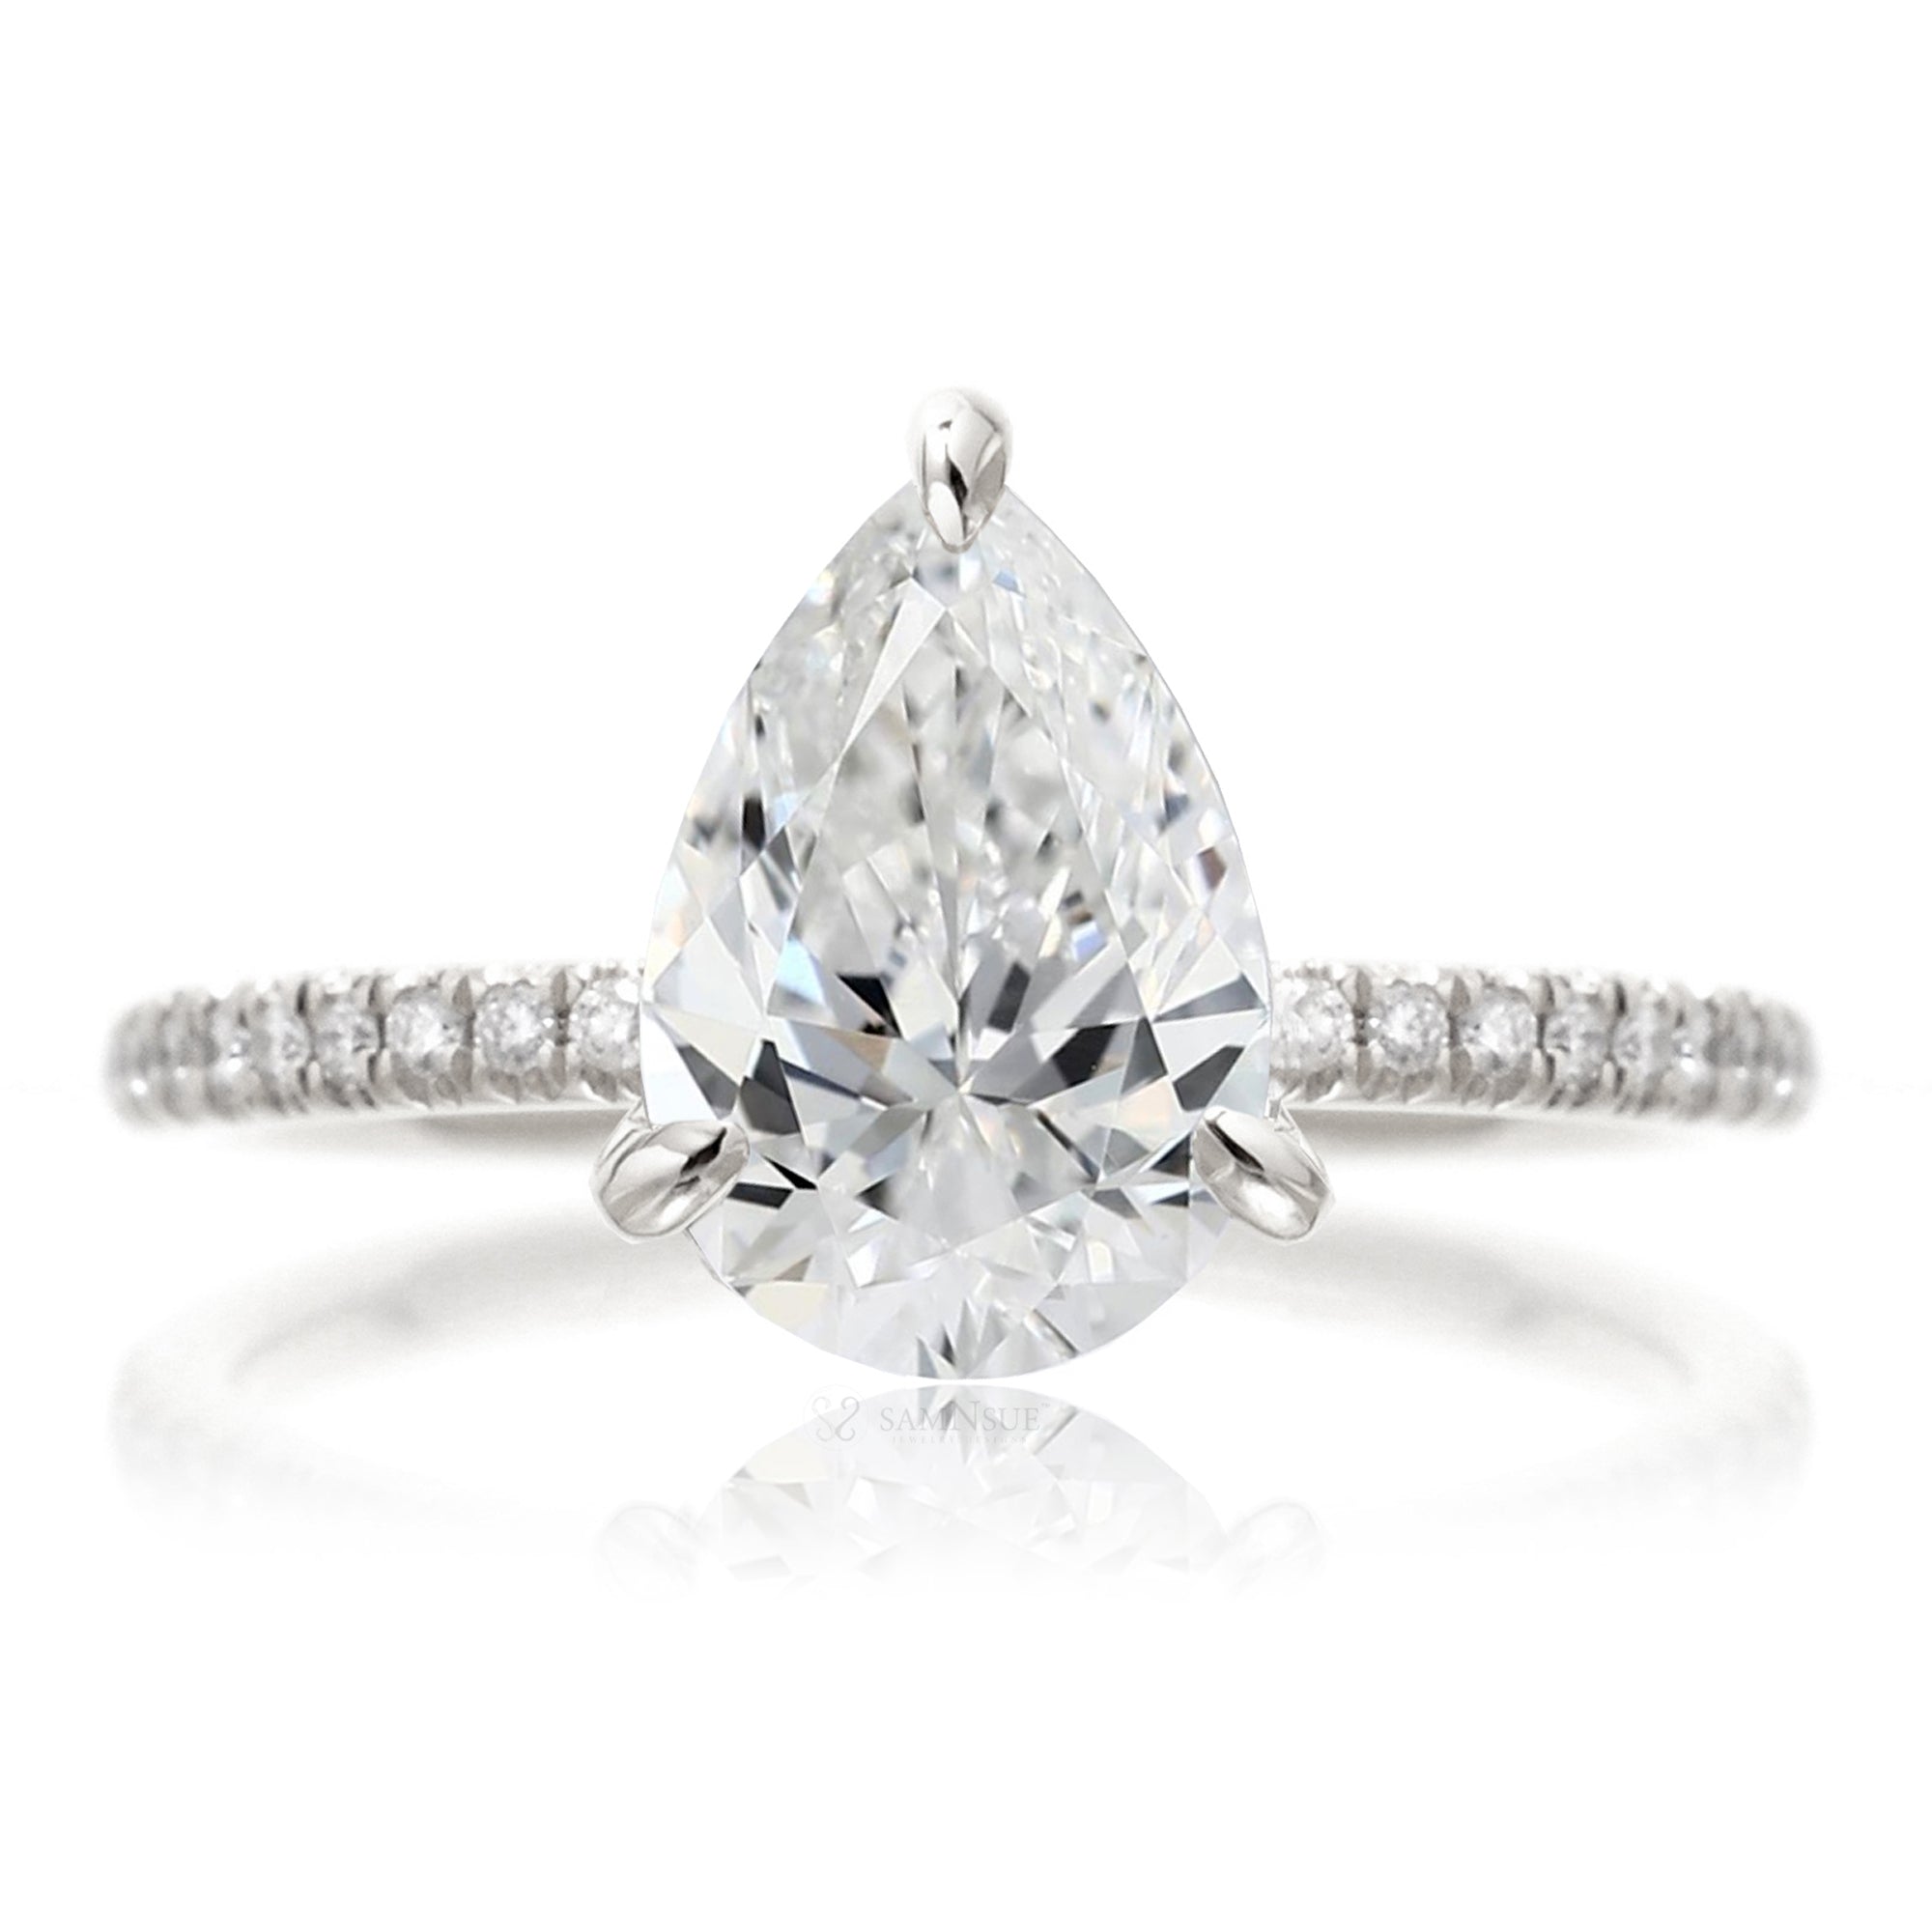 Pear cut lab-grown diamond engagement ring white gold - The Ava